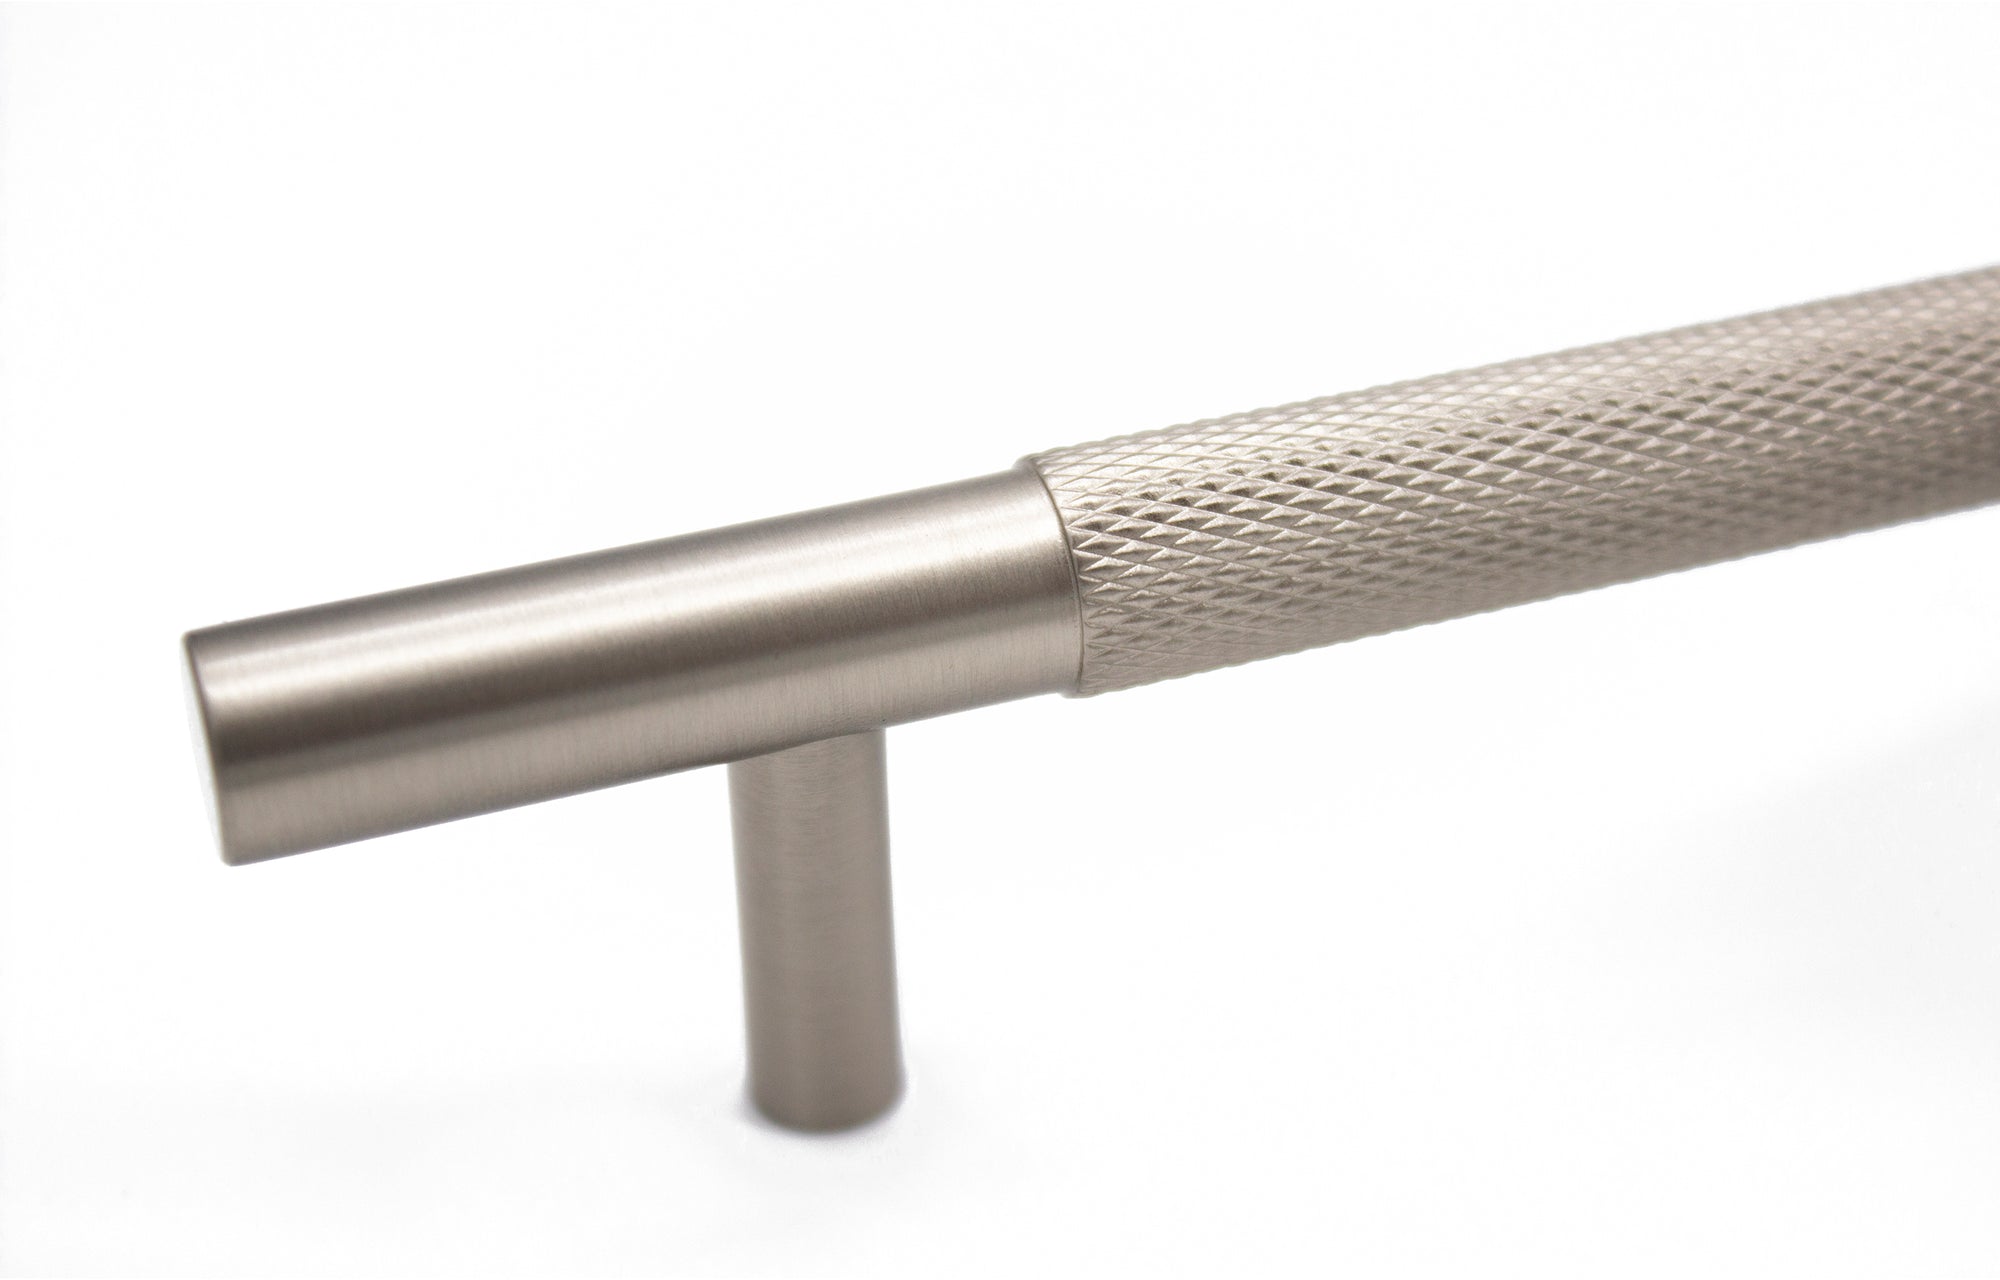 Manovella Introduces a New Range of Brushed Nickel Cabinet Handles